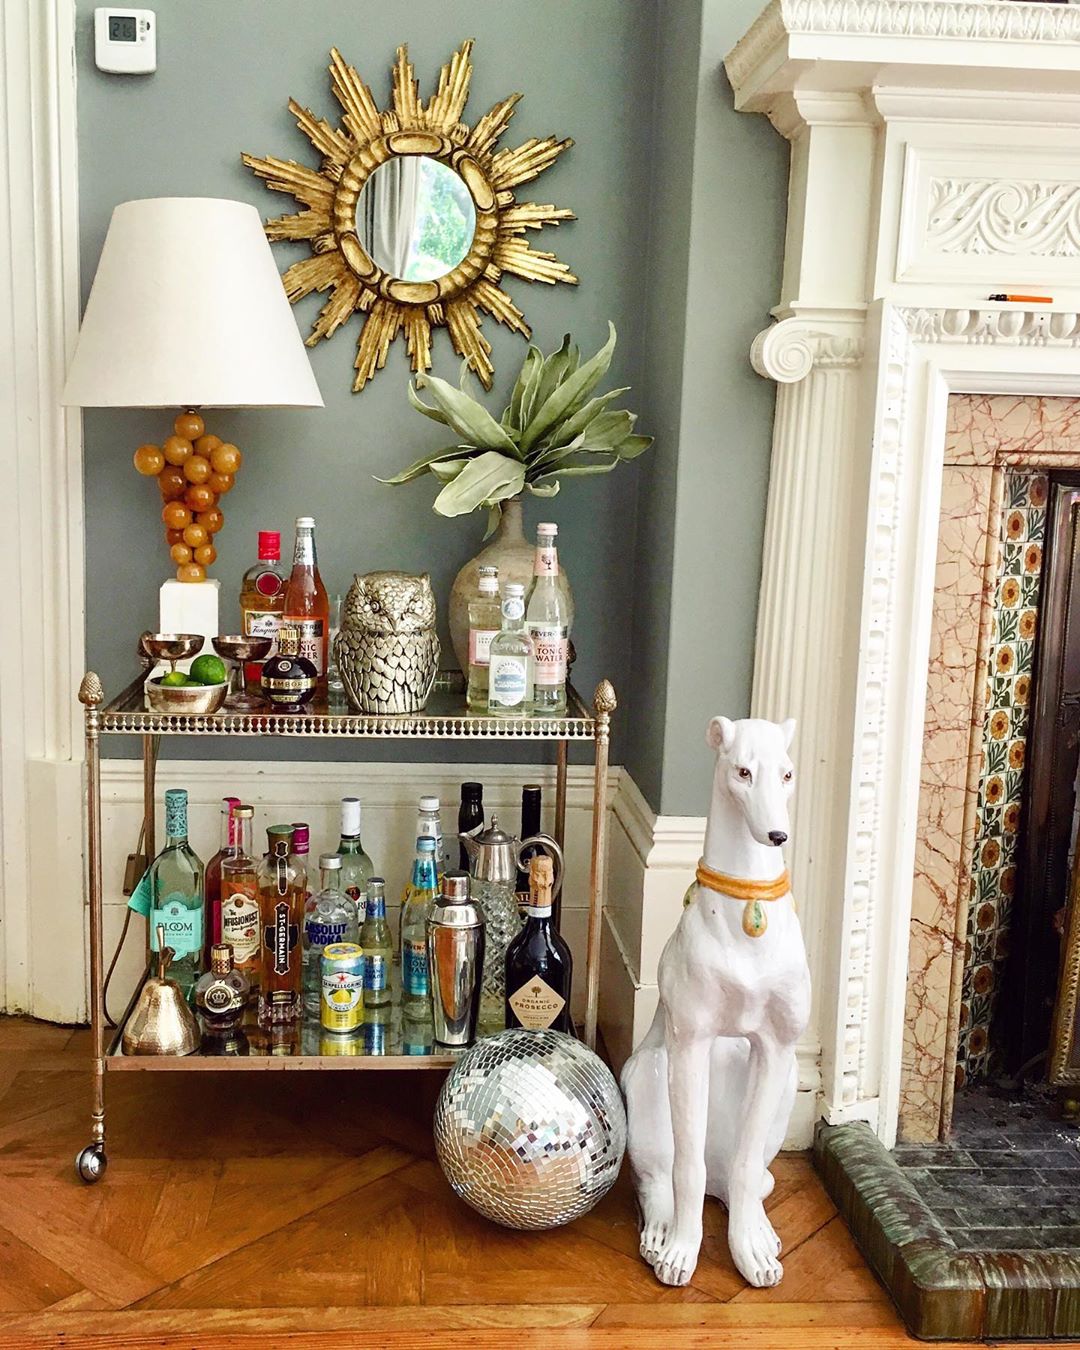 Bar cart with bottles on it and a white dog statue. Photo by Instagram user @thevintagetraderuk